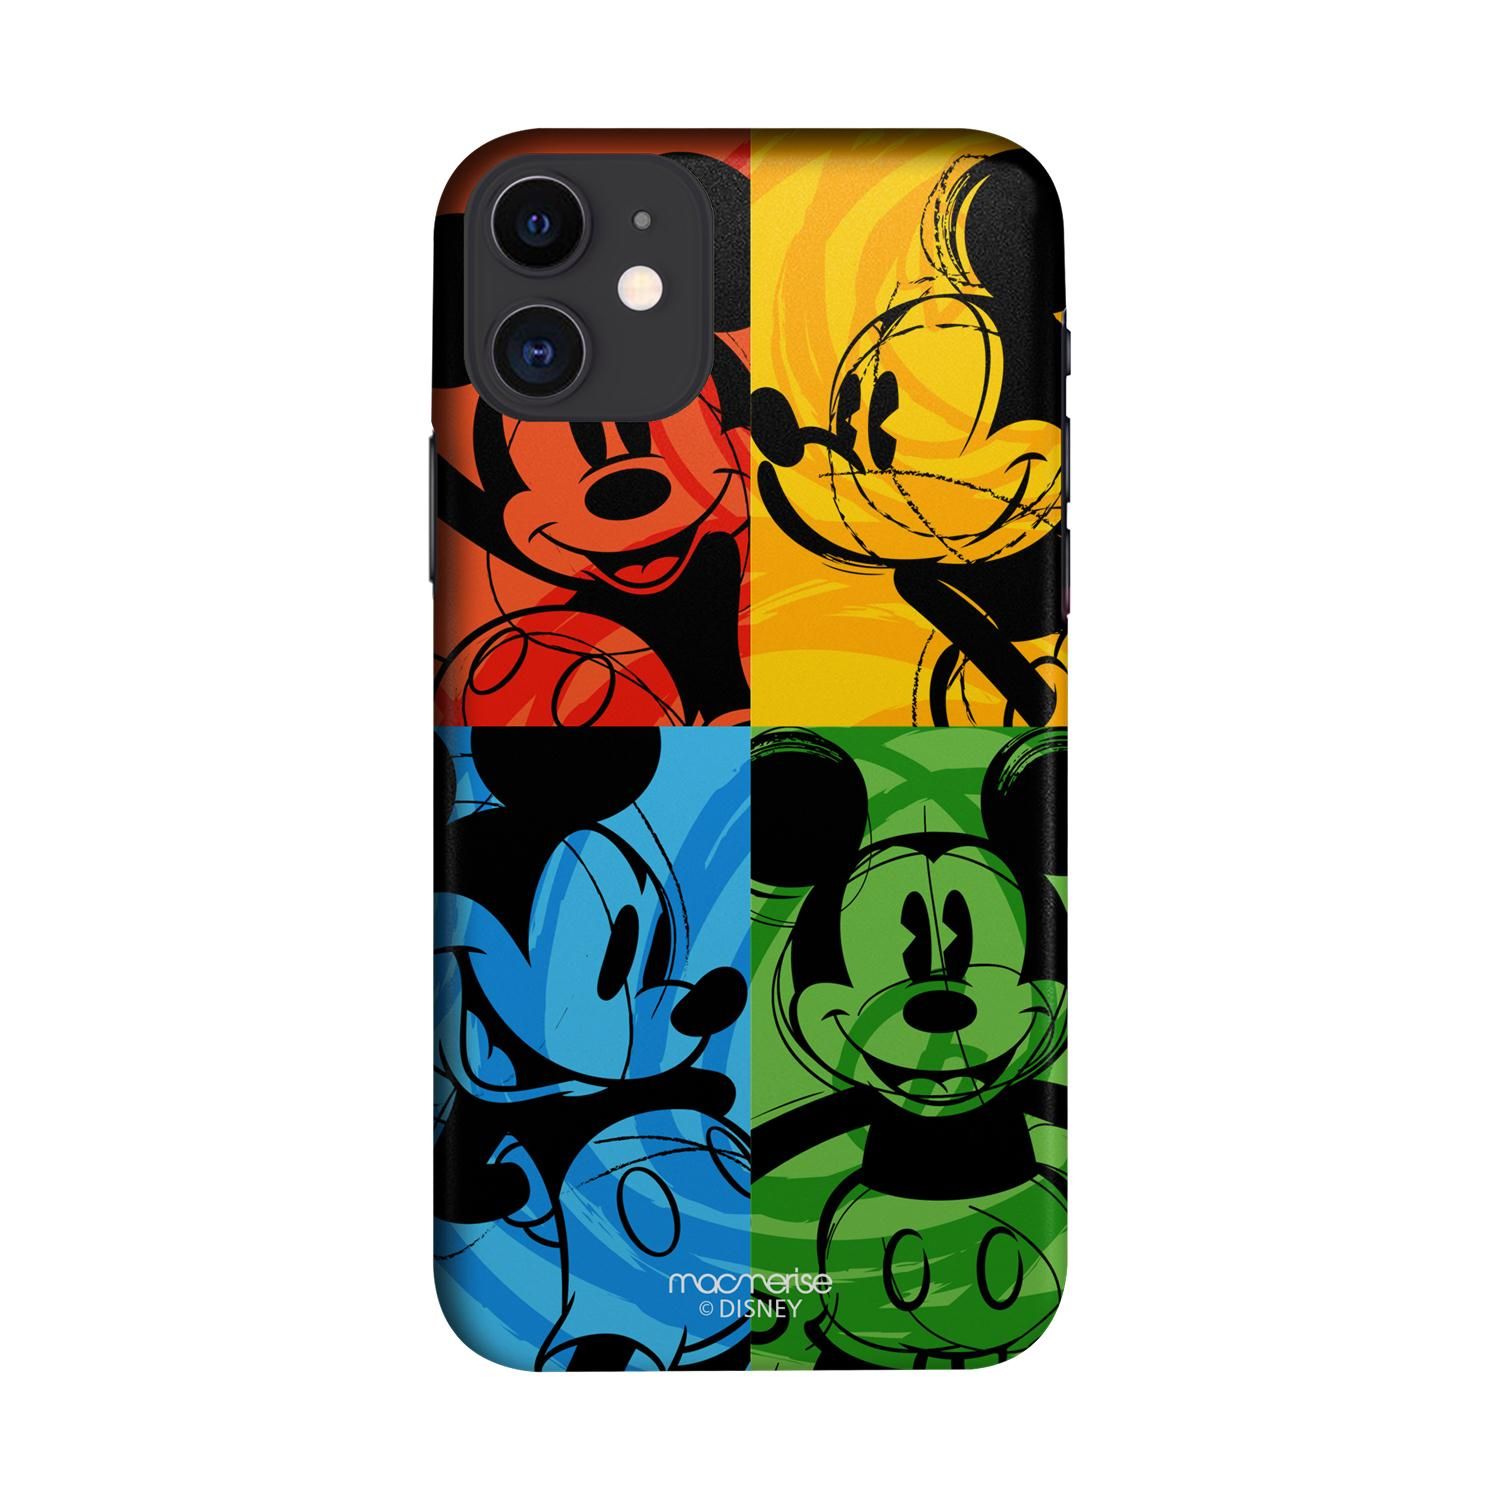 Buy Shades of Mickey - Sleek Phone Case for iPhone 11 Online